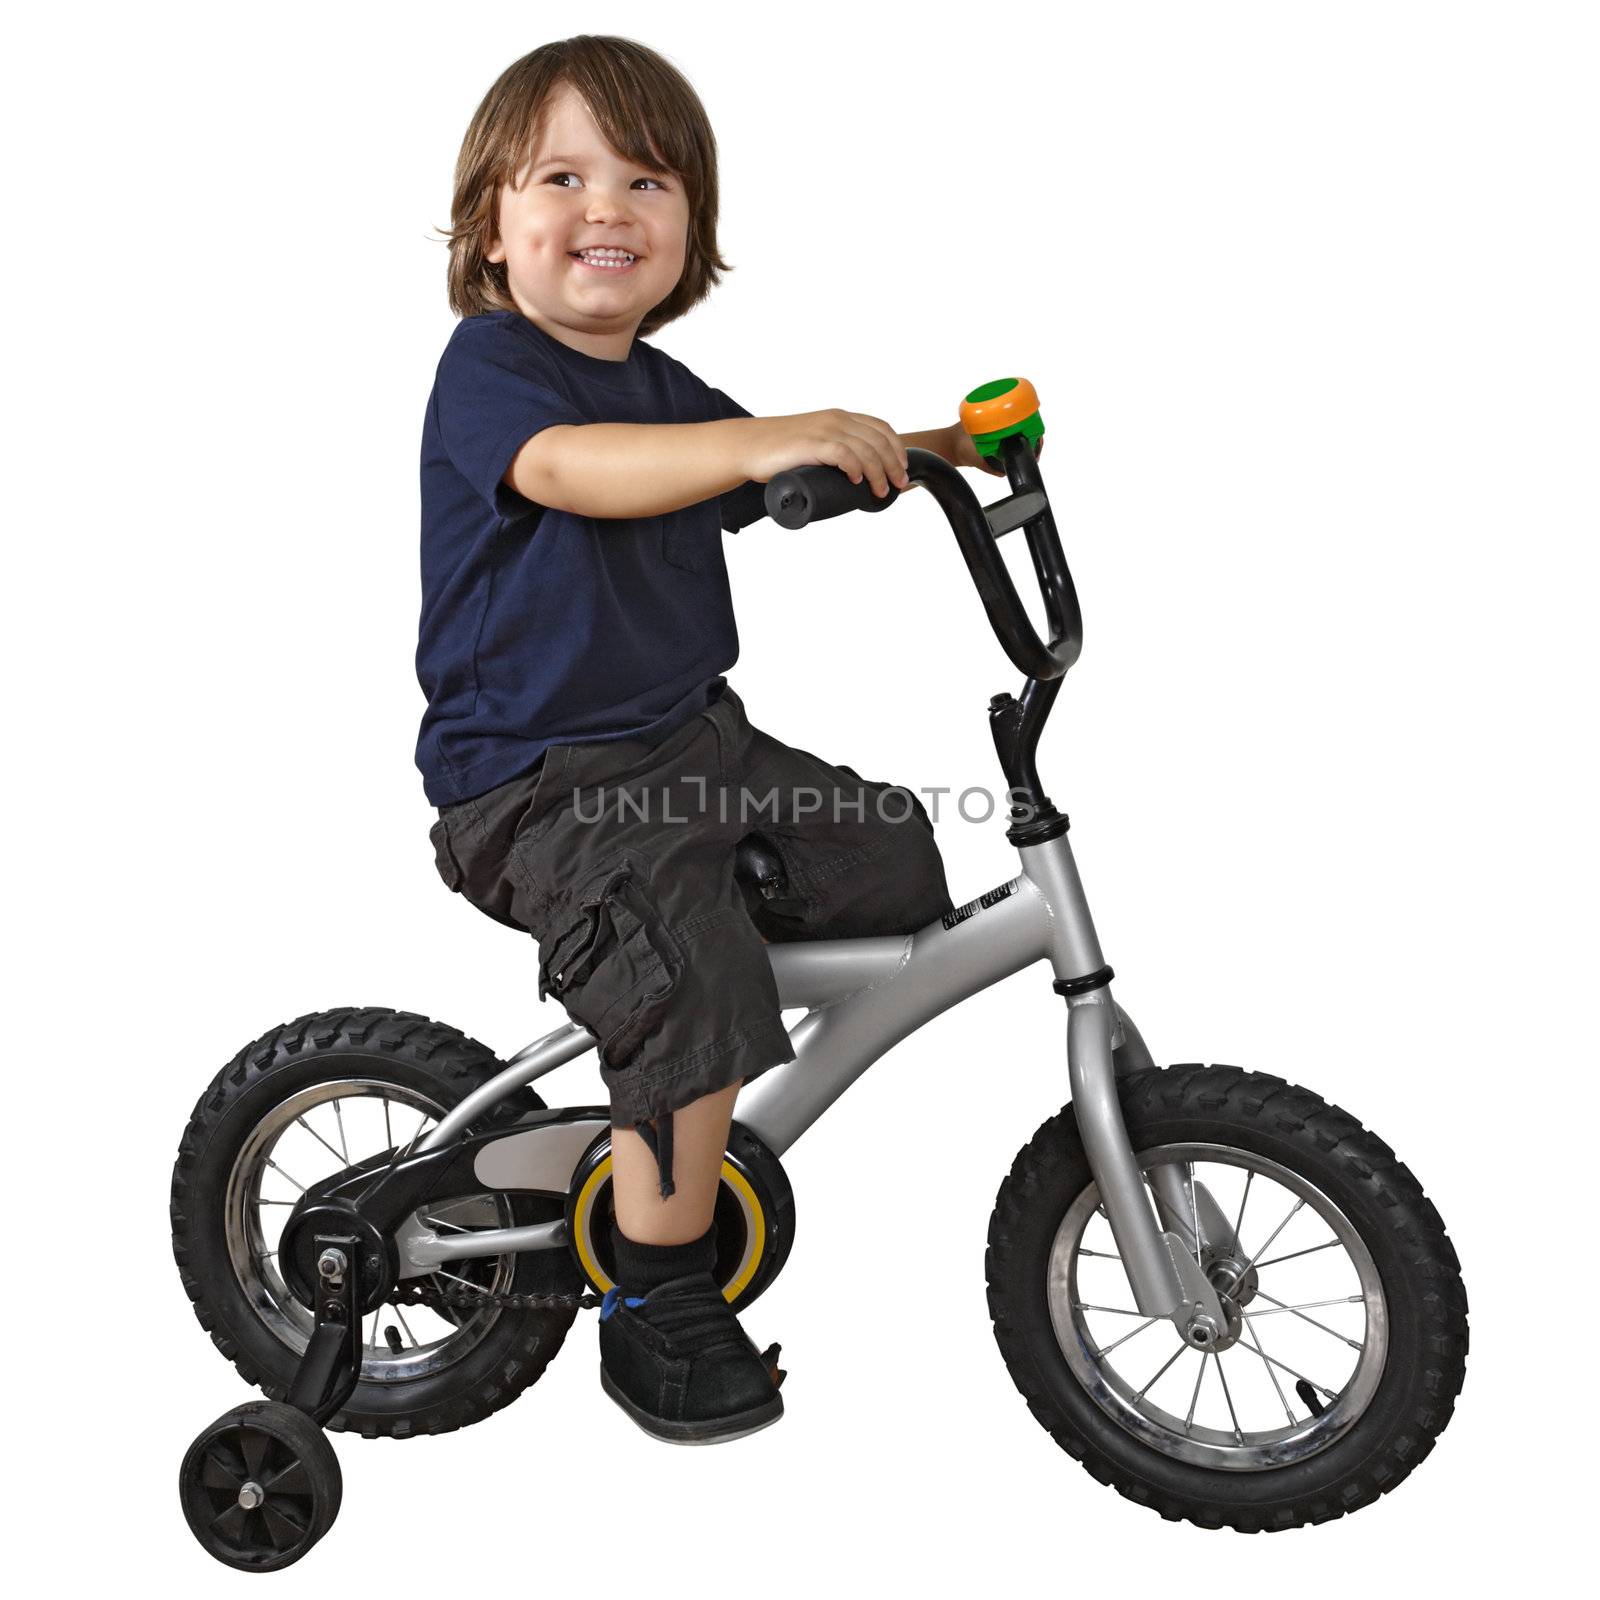 An adorable 3-year-old riding his bicycle fitted with training wheels.